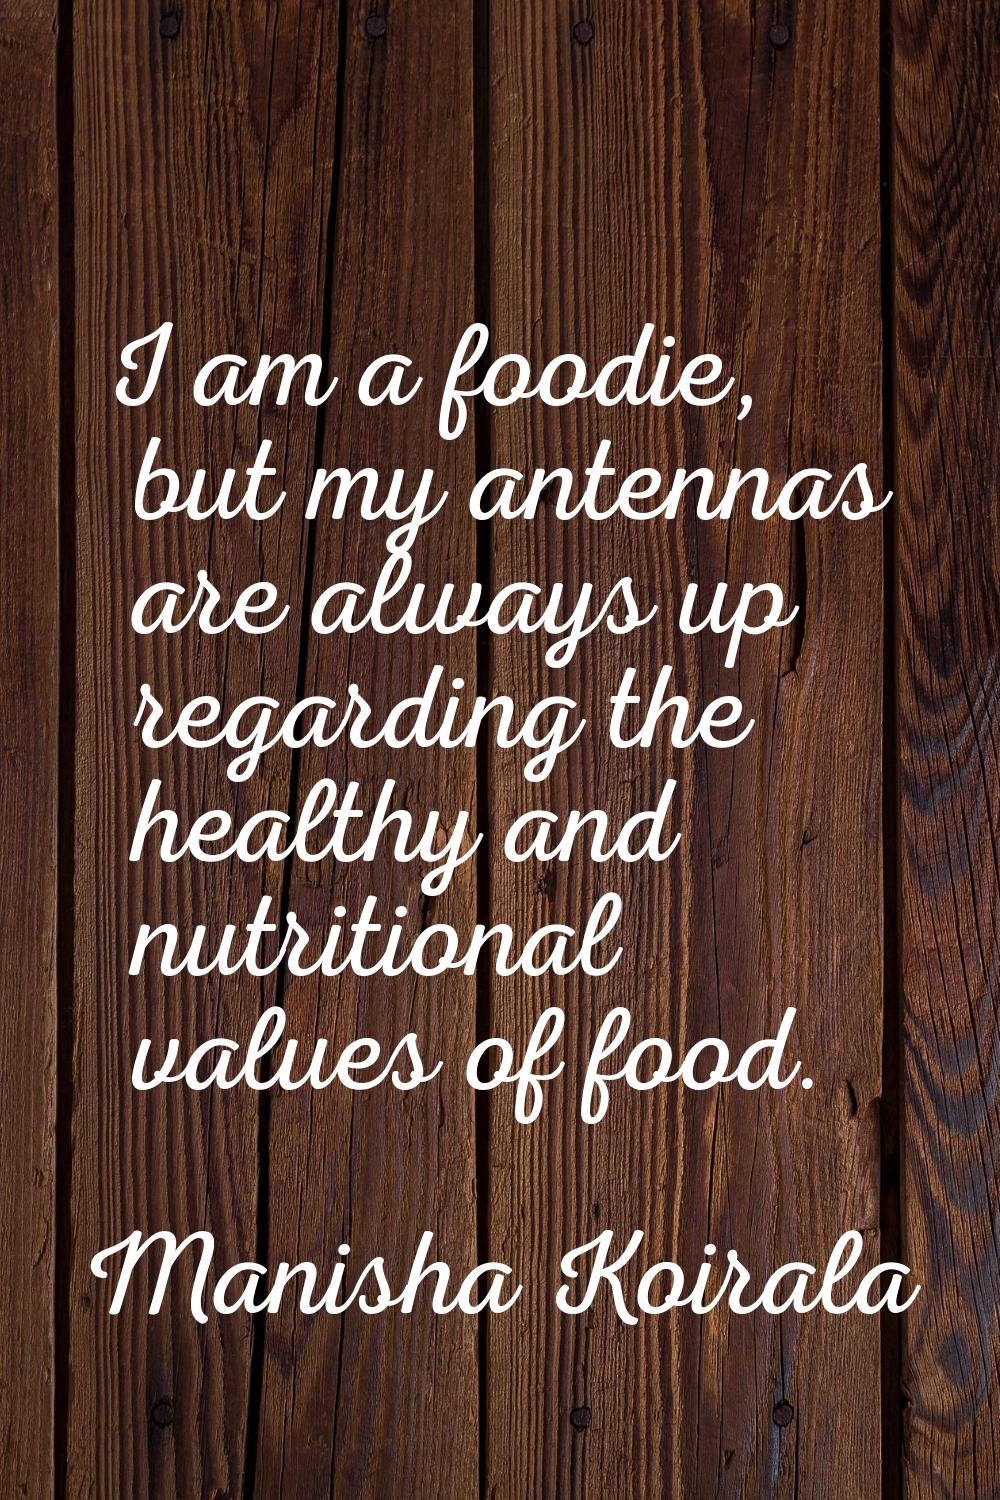 I am a foodie, but my antennas are always up regarding the healthy and nutritional values of food.